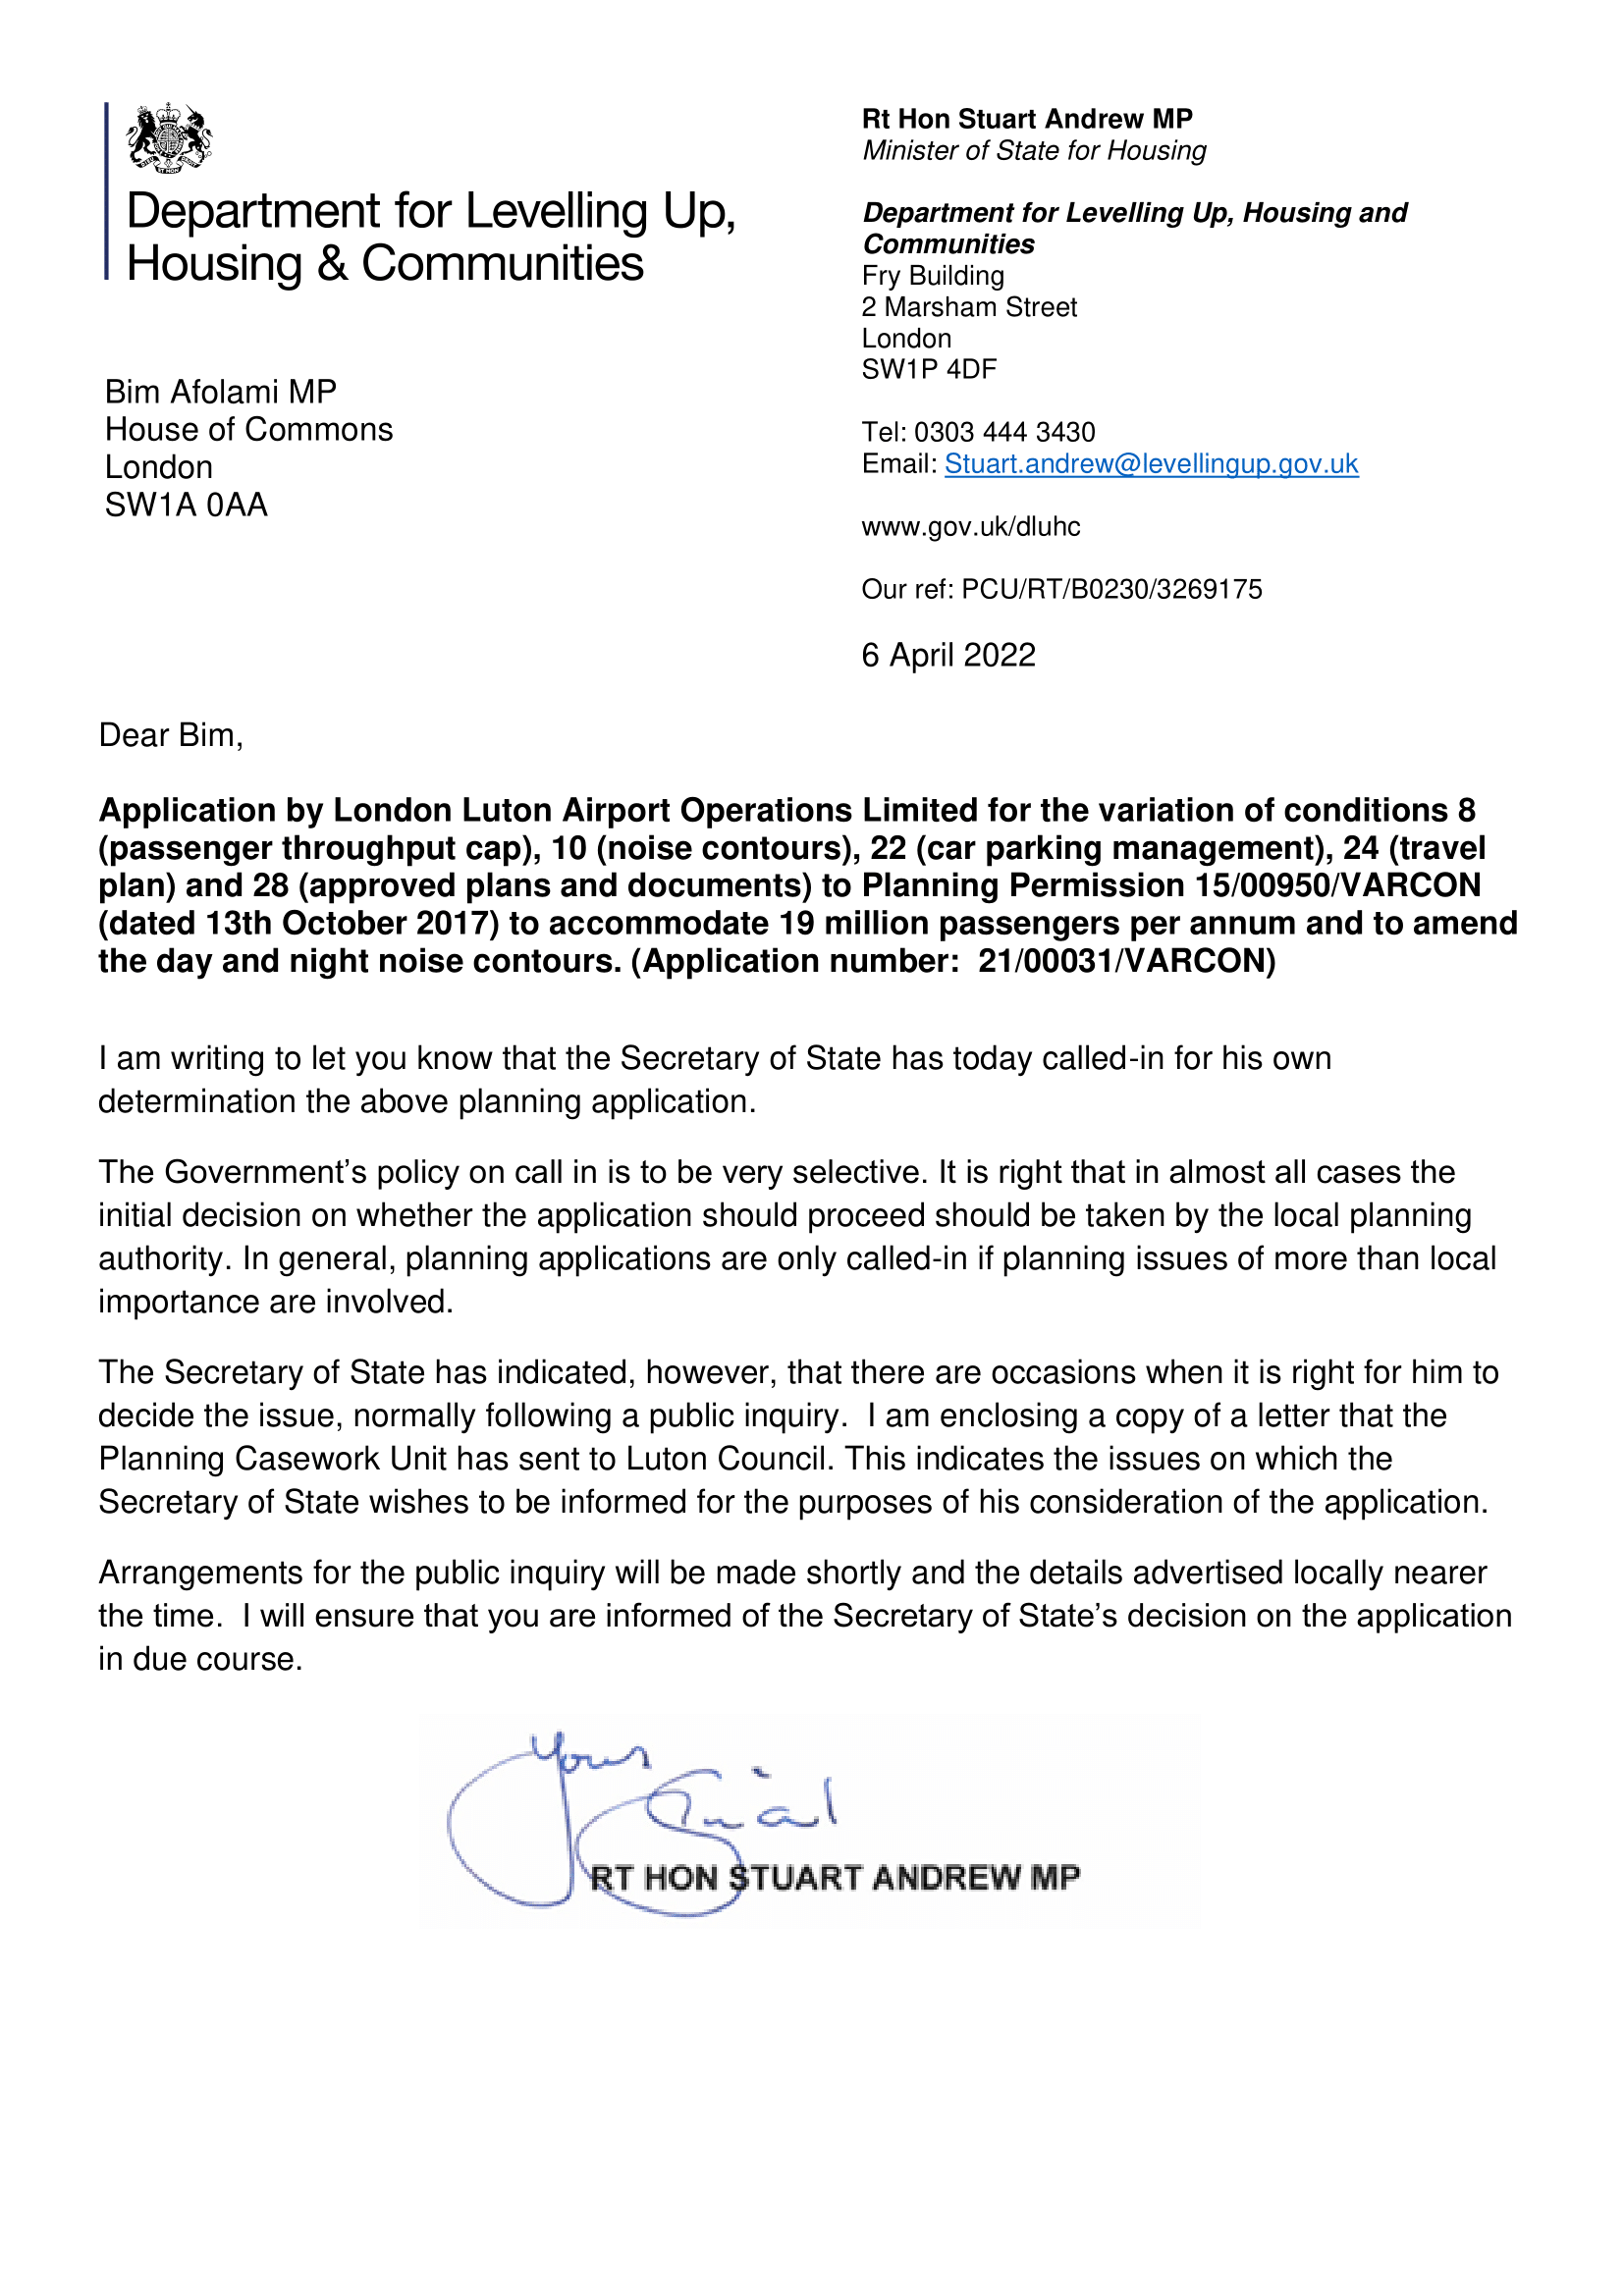 Letter from the Secretary of State